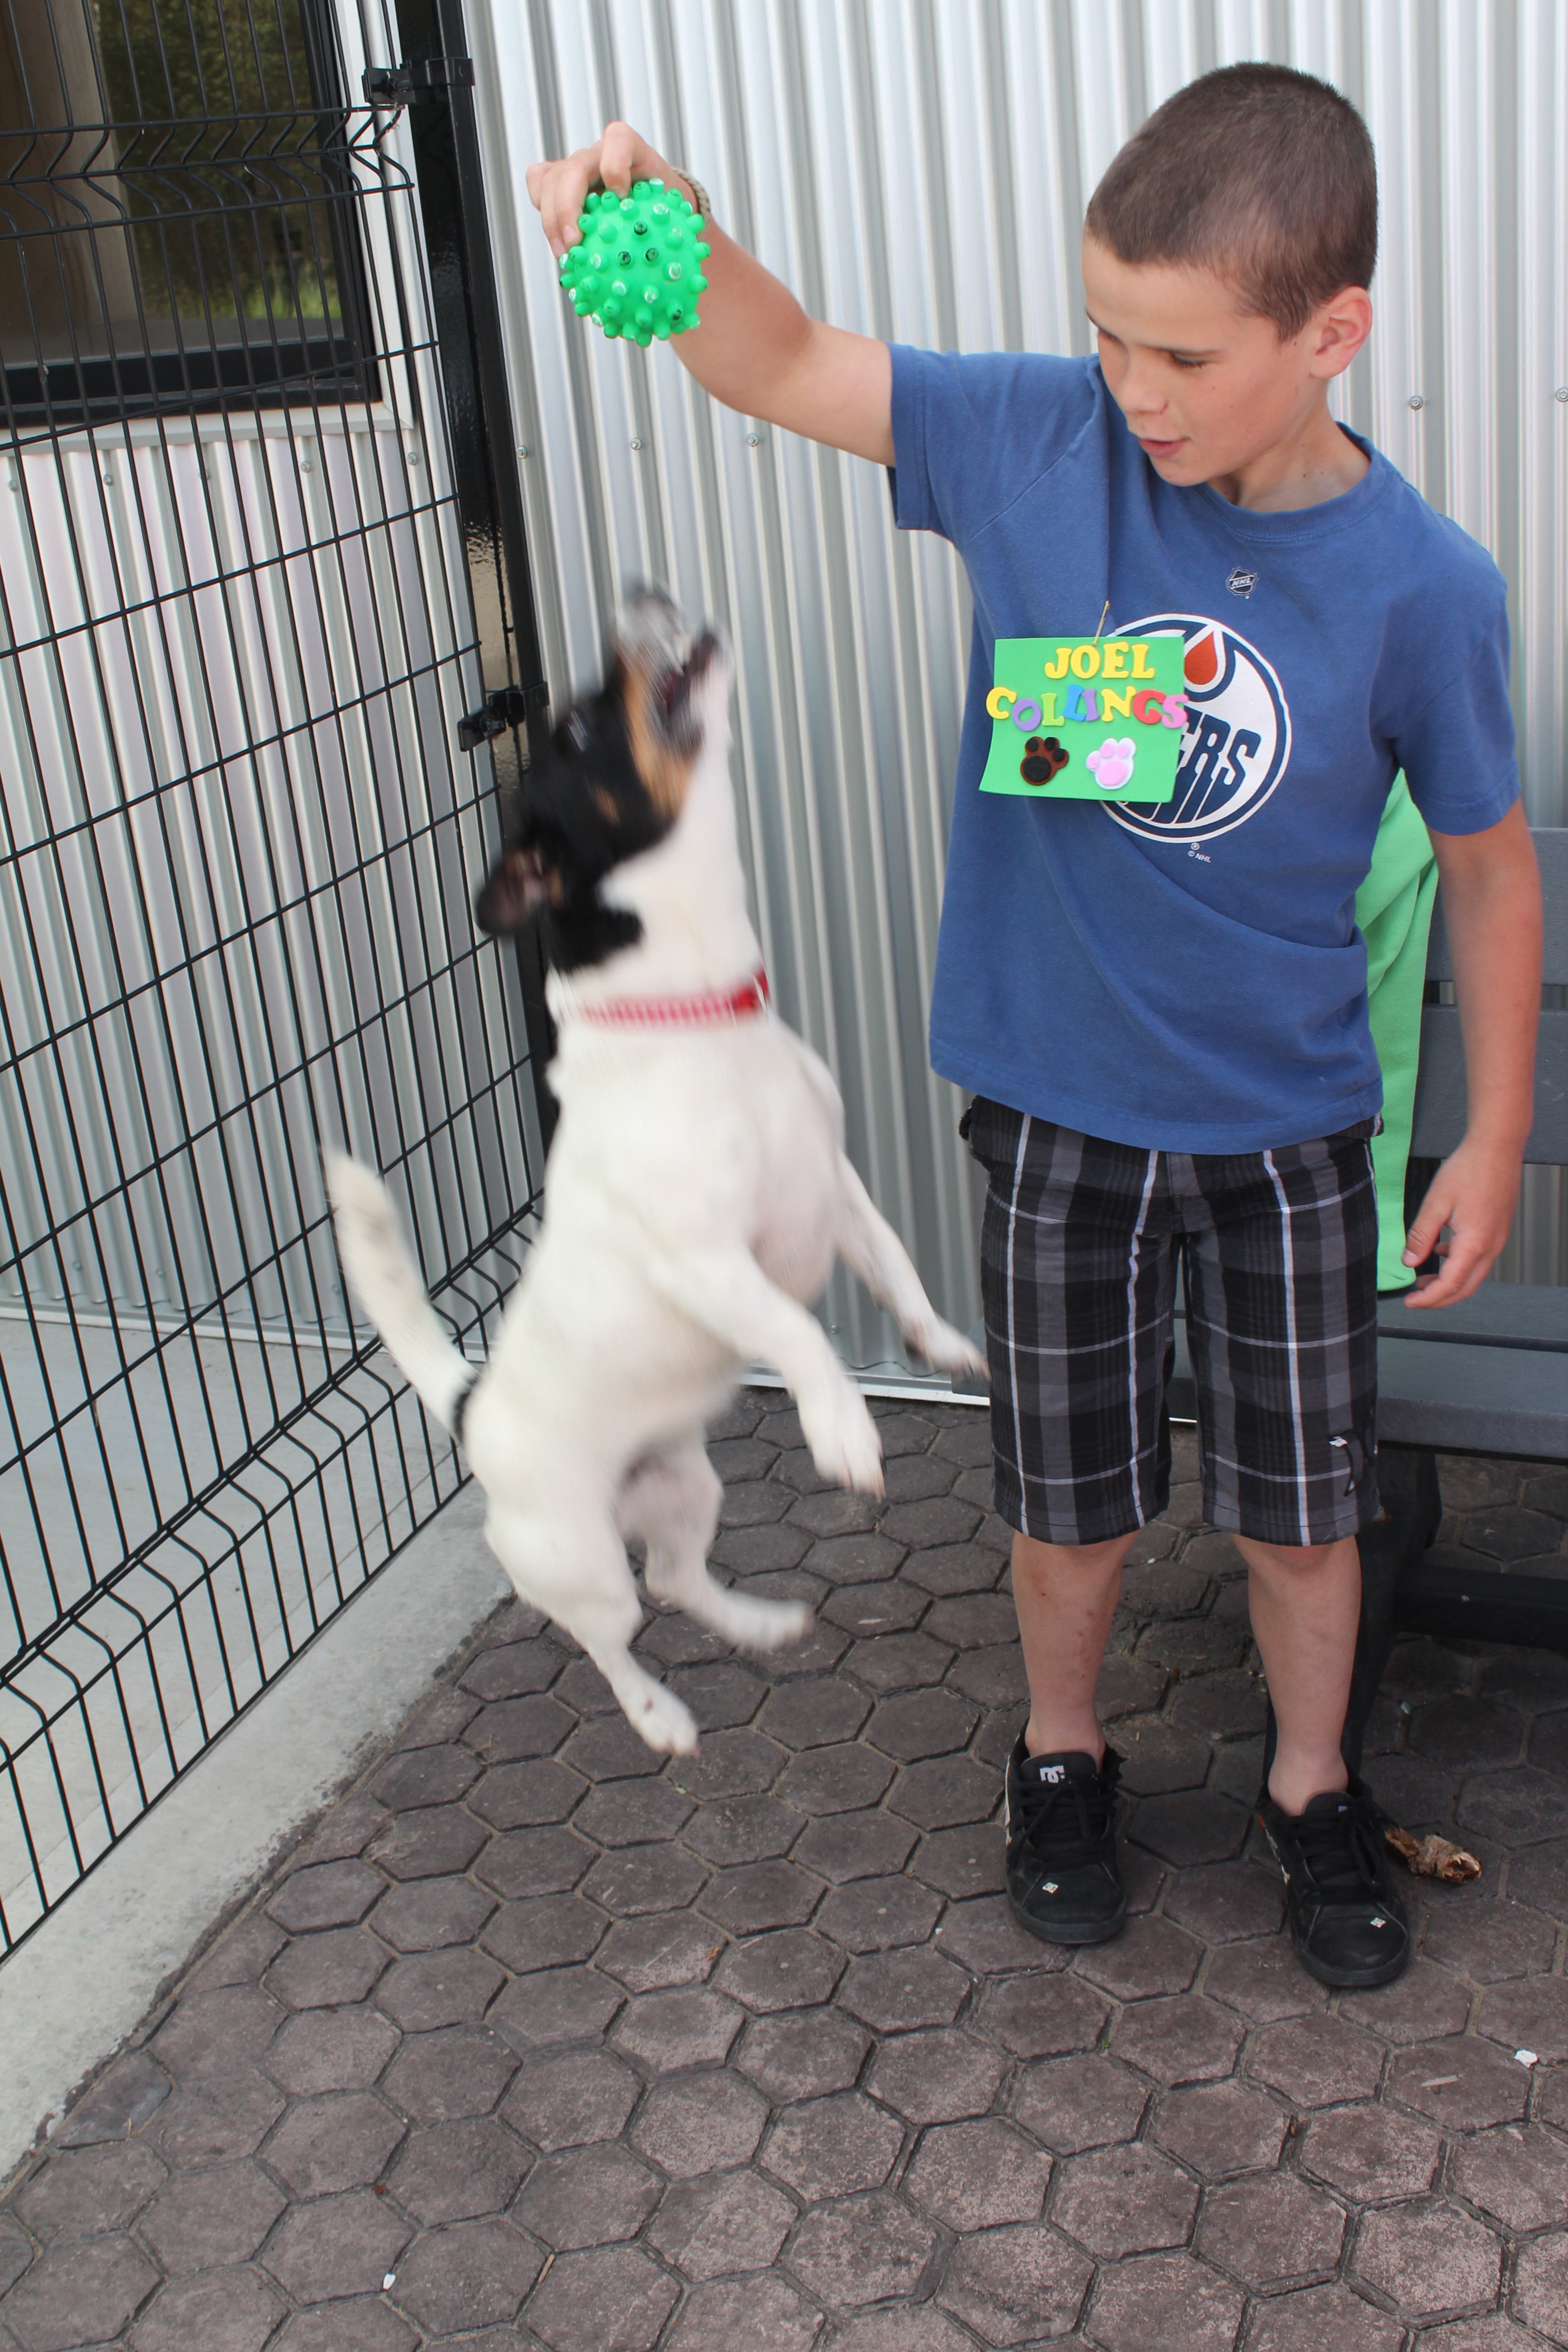 PLAYFUL PUP- Joel Collings plays with Eddie while attending a SPCA summer camp this past week. Eddies is waiting for his "forever home".